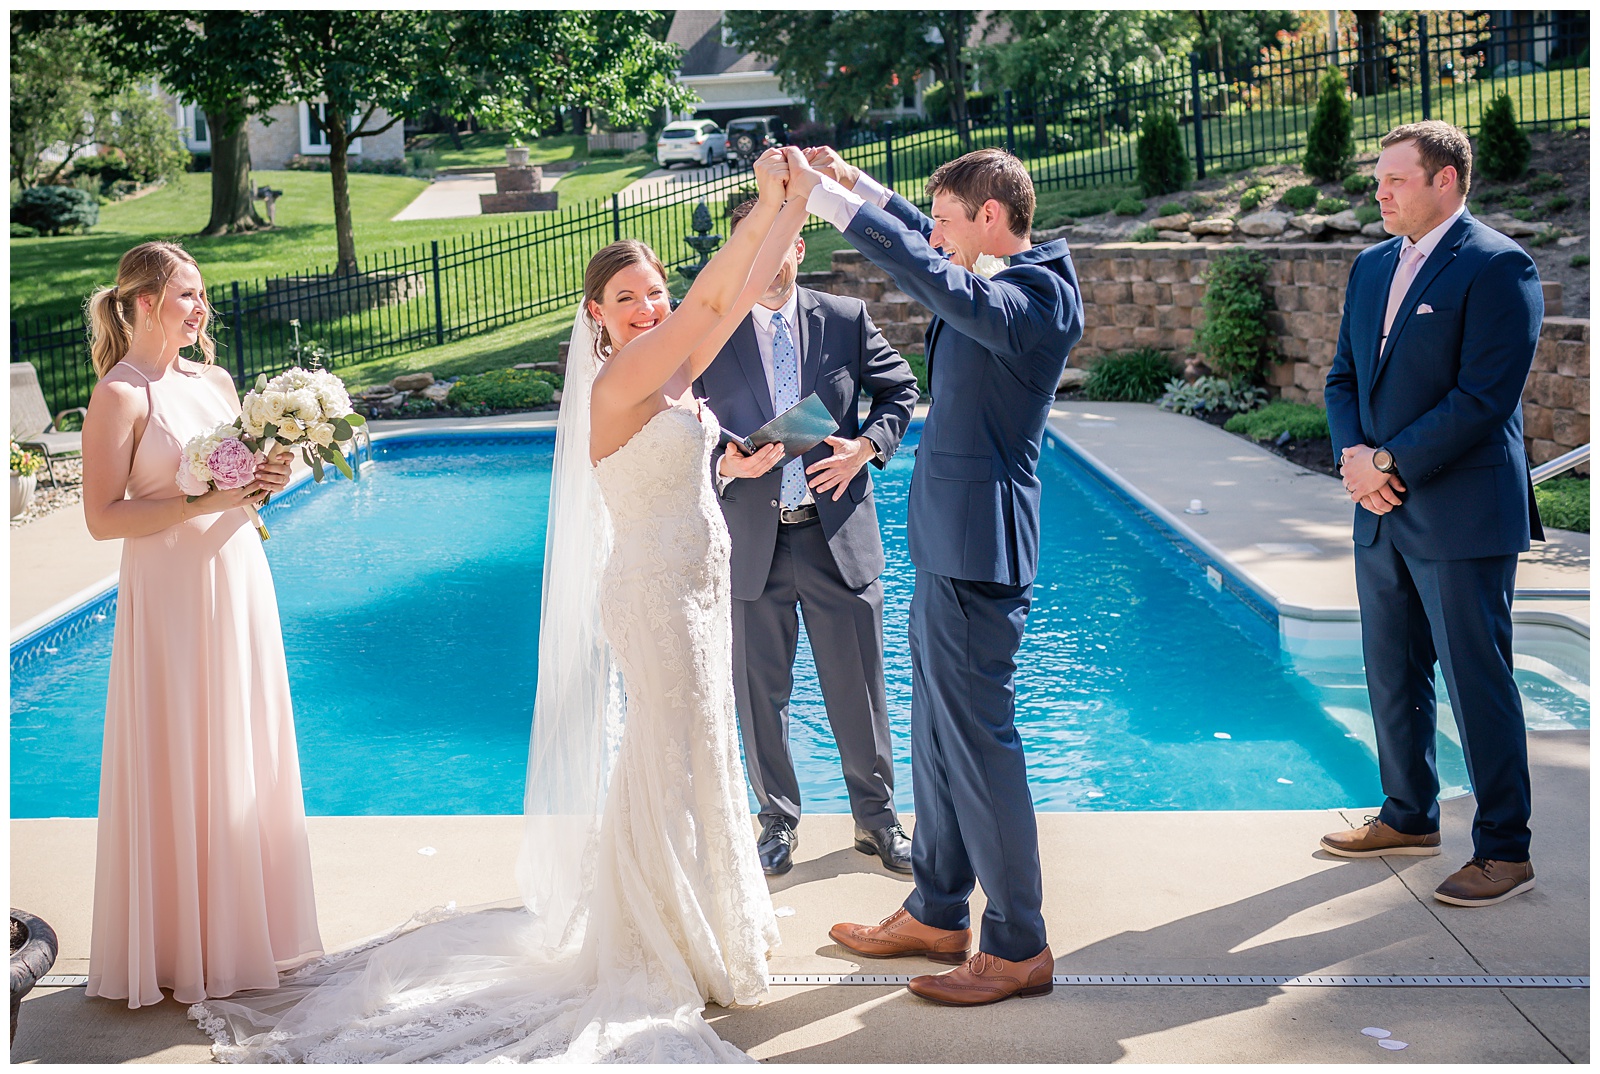 Wedding photography in Overland Park, Kansas, by Kansas City wedding photographers Wisdom-Watson Weddings.